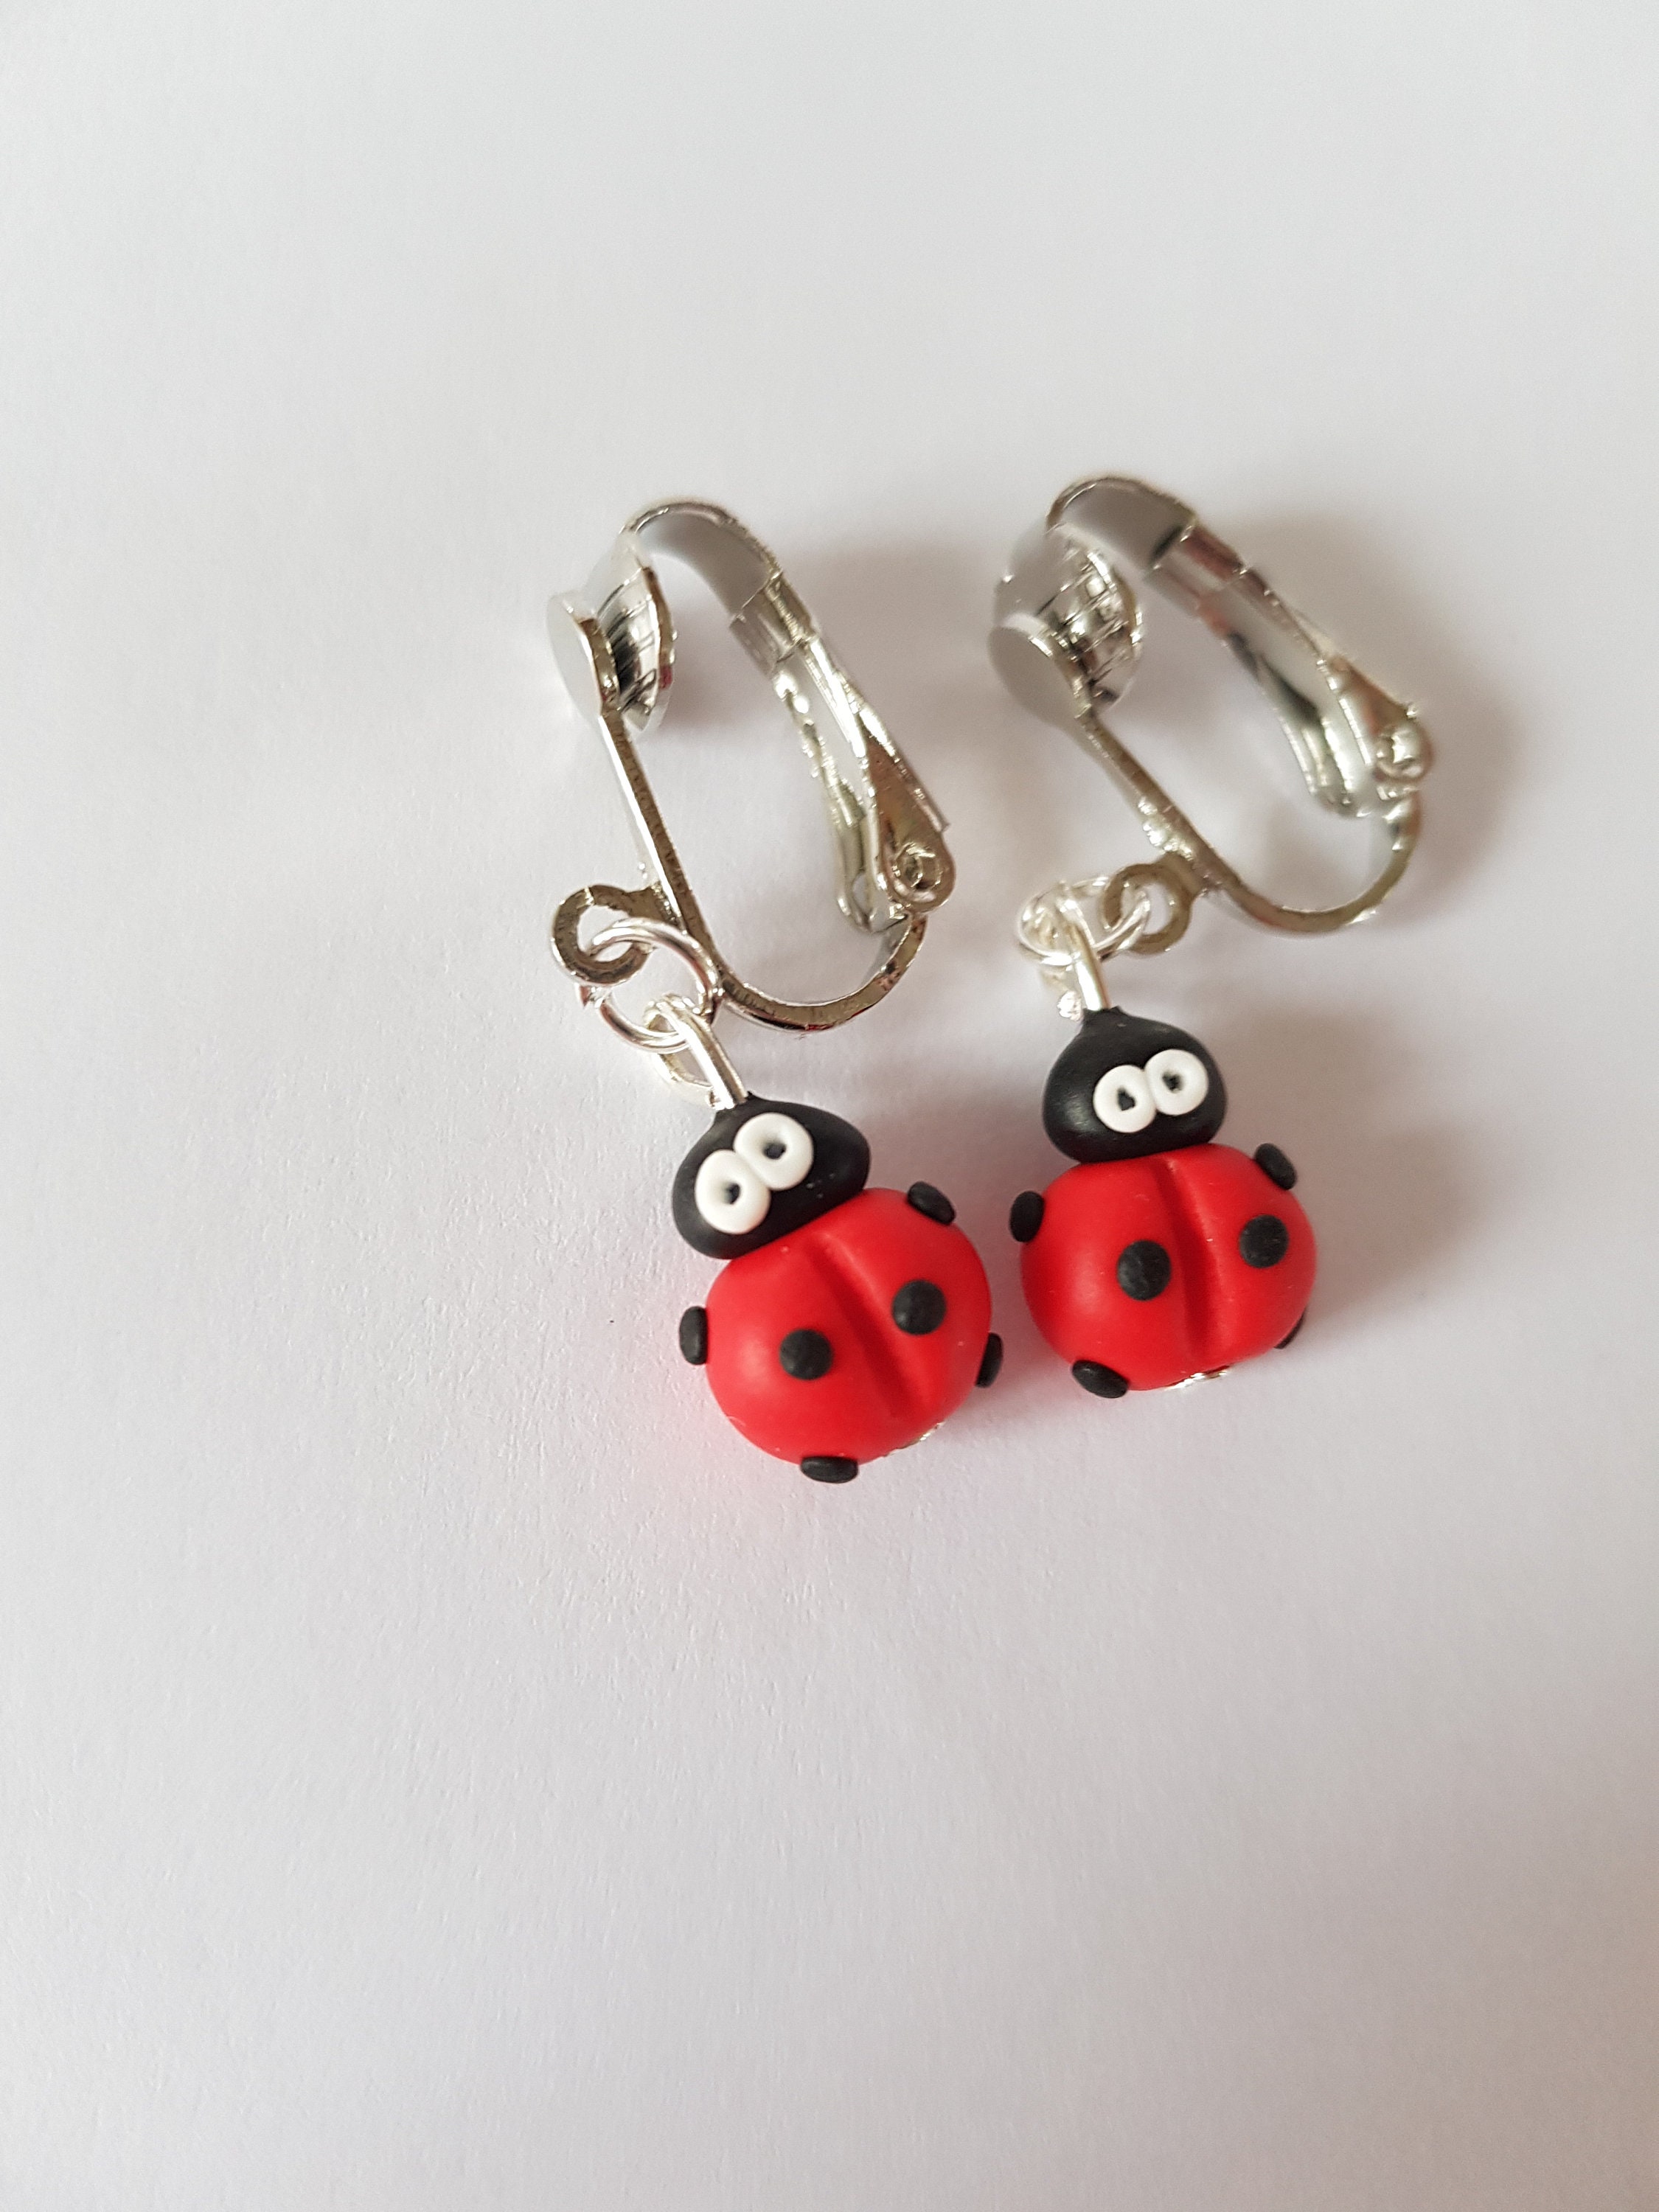 Buy Ladybug Earrings Clip on Earrings No Pierced Ladybird Design Jewellery  with Silver Ear Cuff Black Spot Red Charm for Girl woman Cosplay Metal  crystal at Amazonin